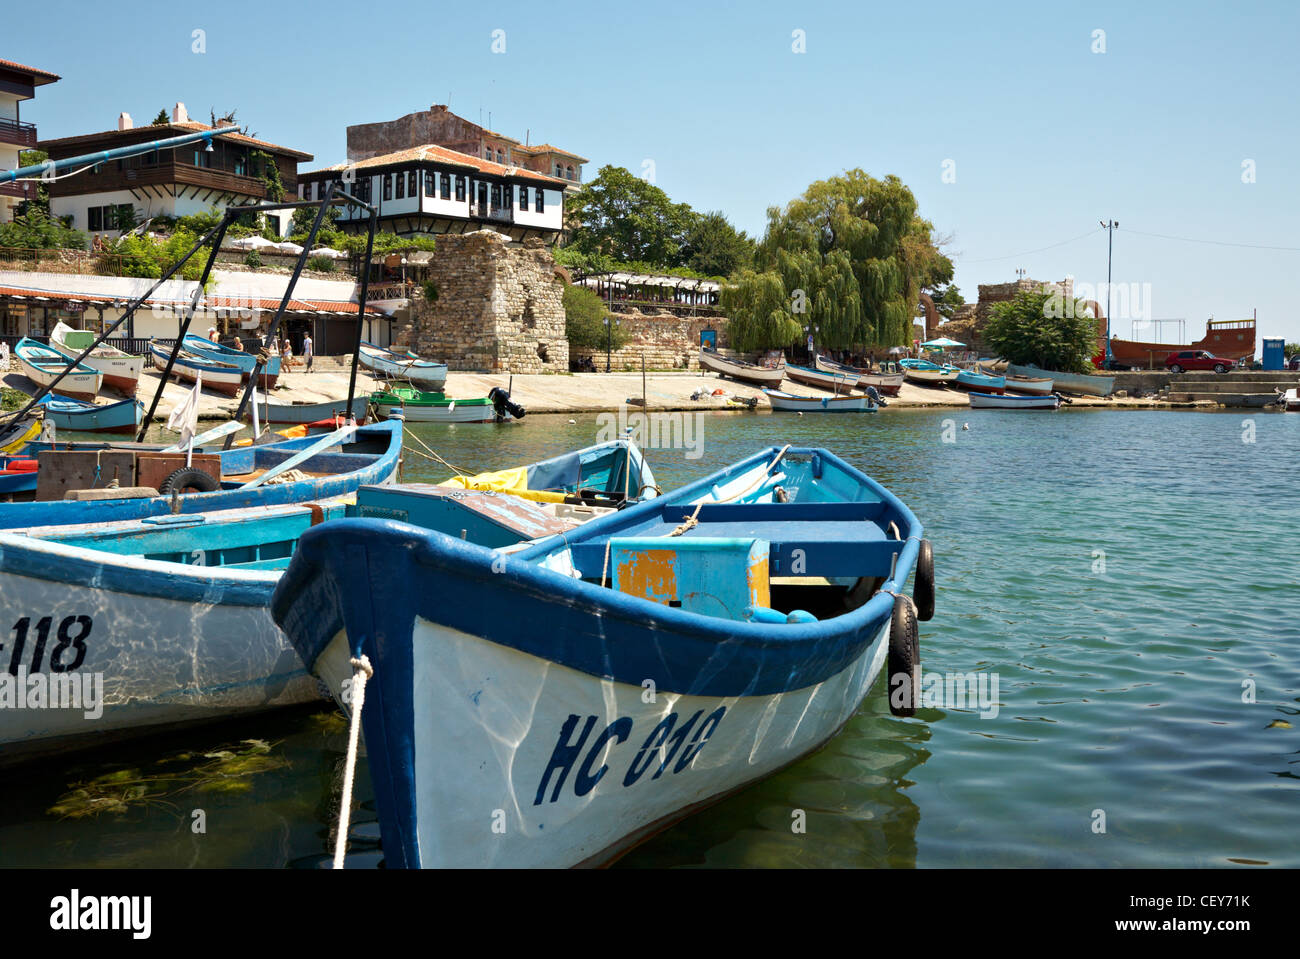 Ancient Nessebar town view with boats Stock Photo